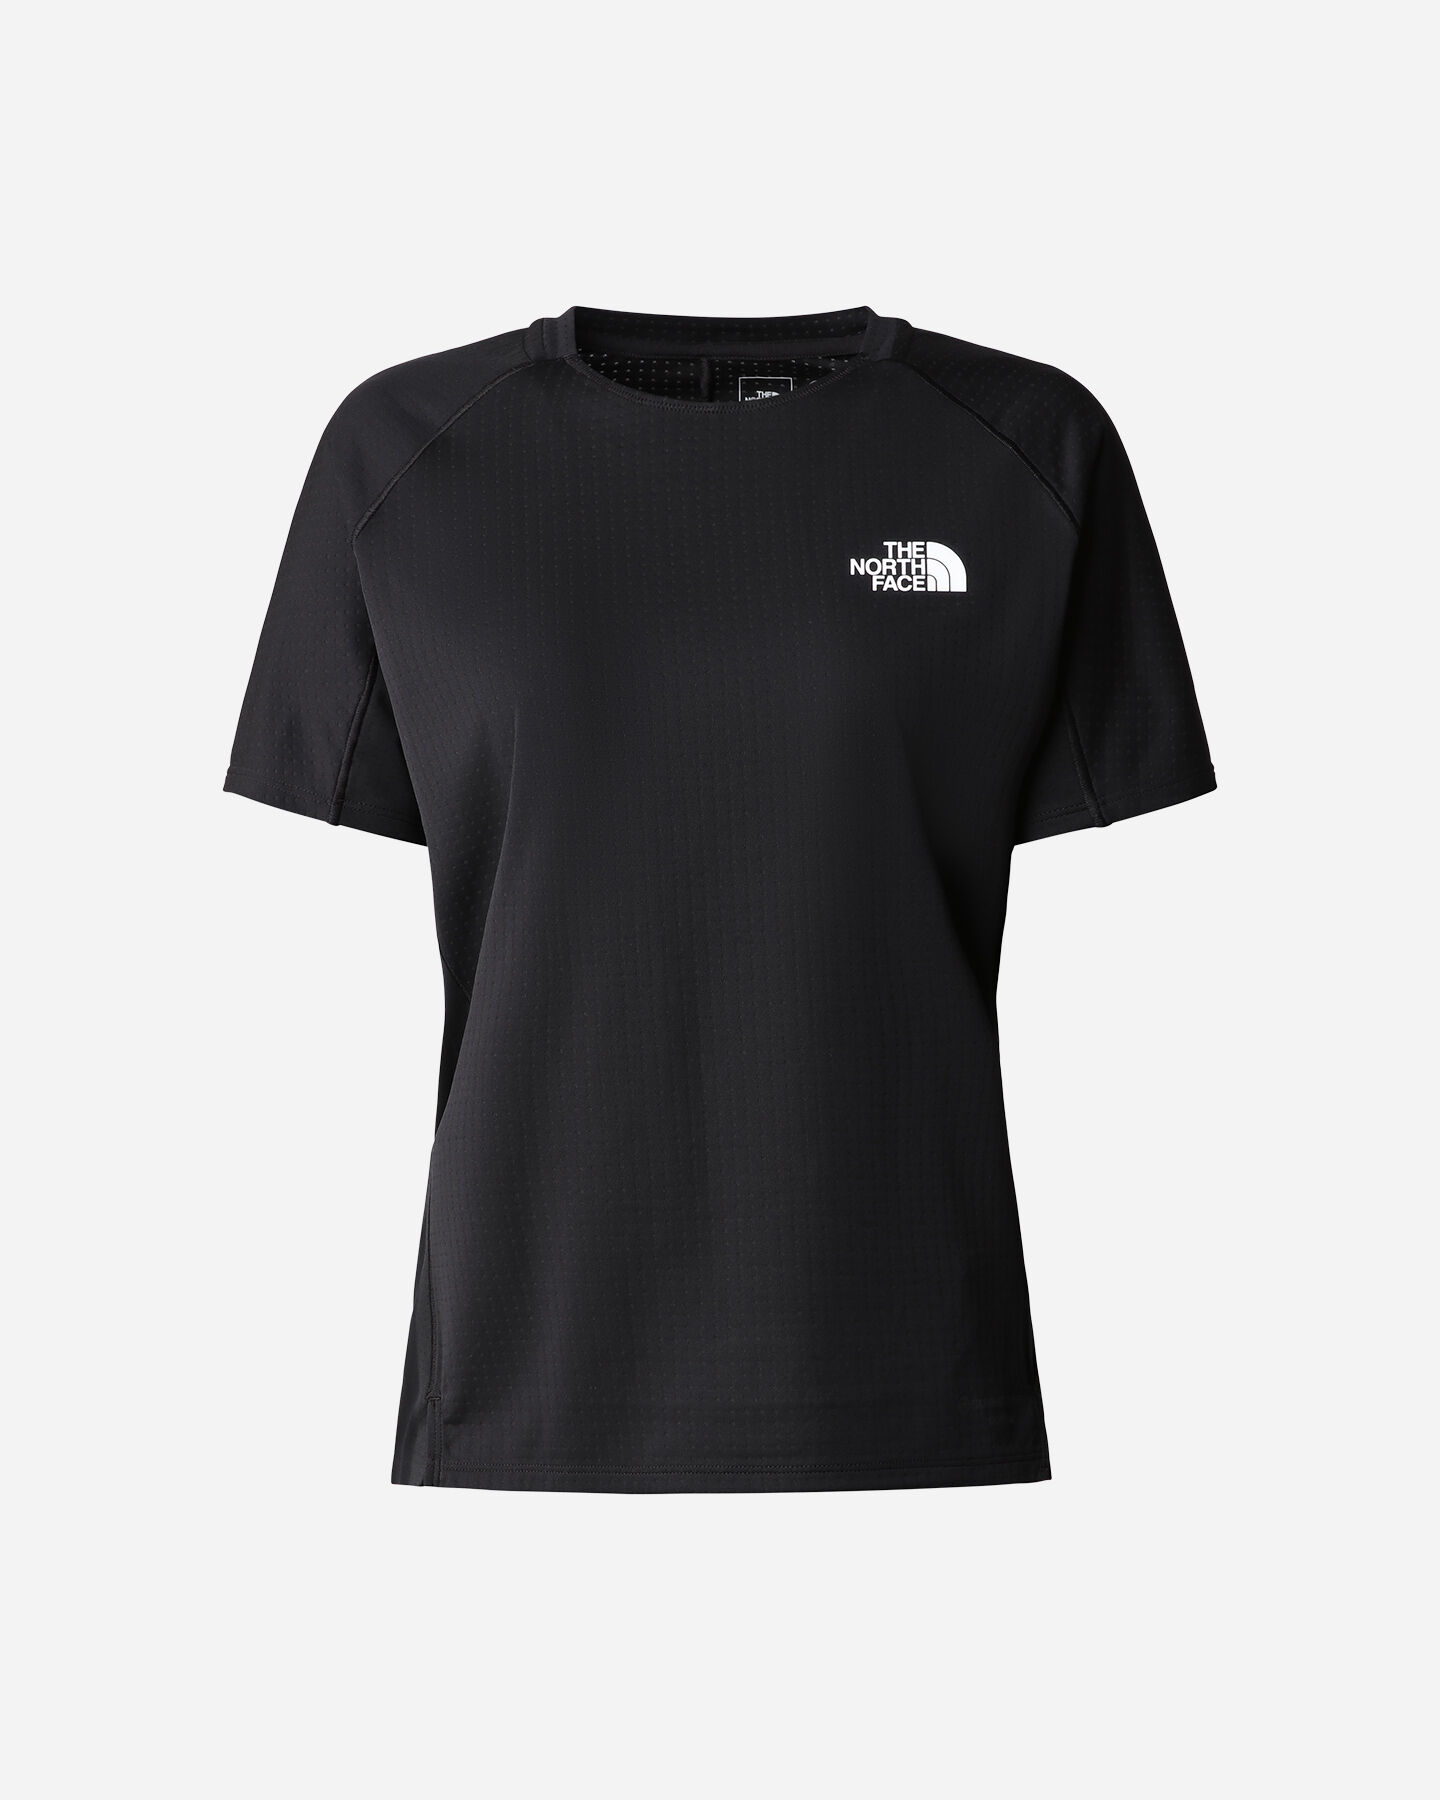  T-Shirt THE NORTH FACE SUMMIT CREVASSE W S5536554|JK3|XS scatto 0